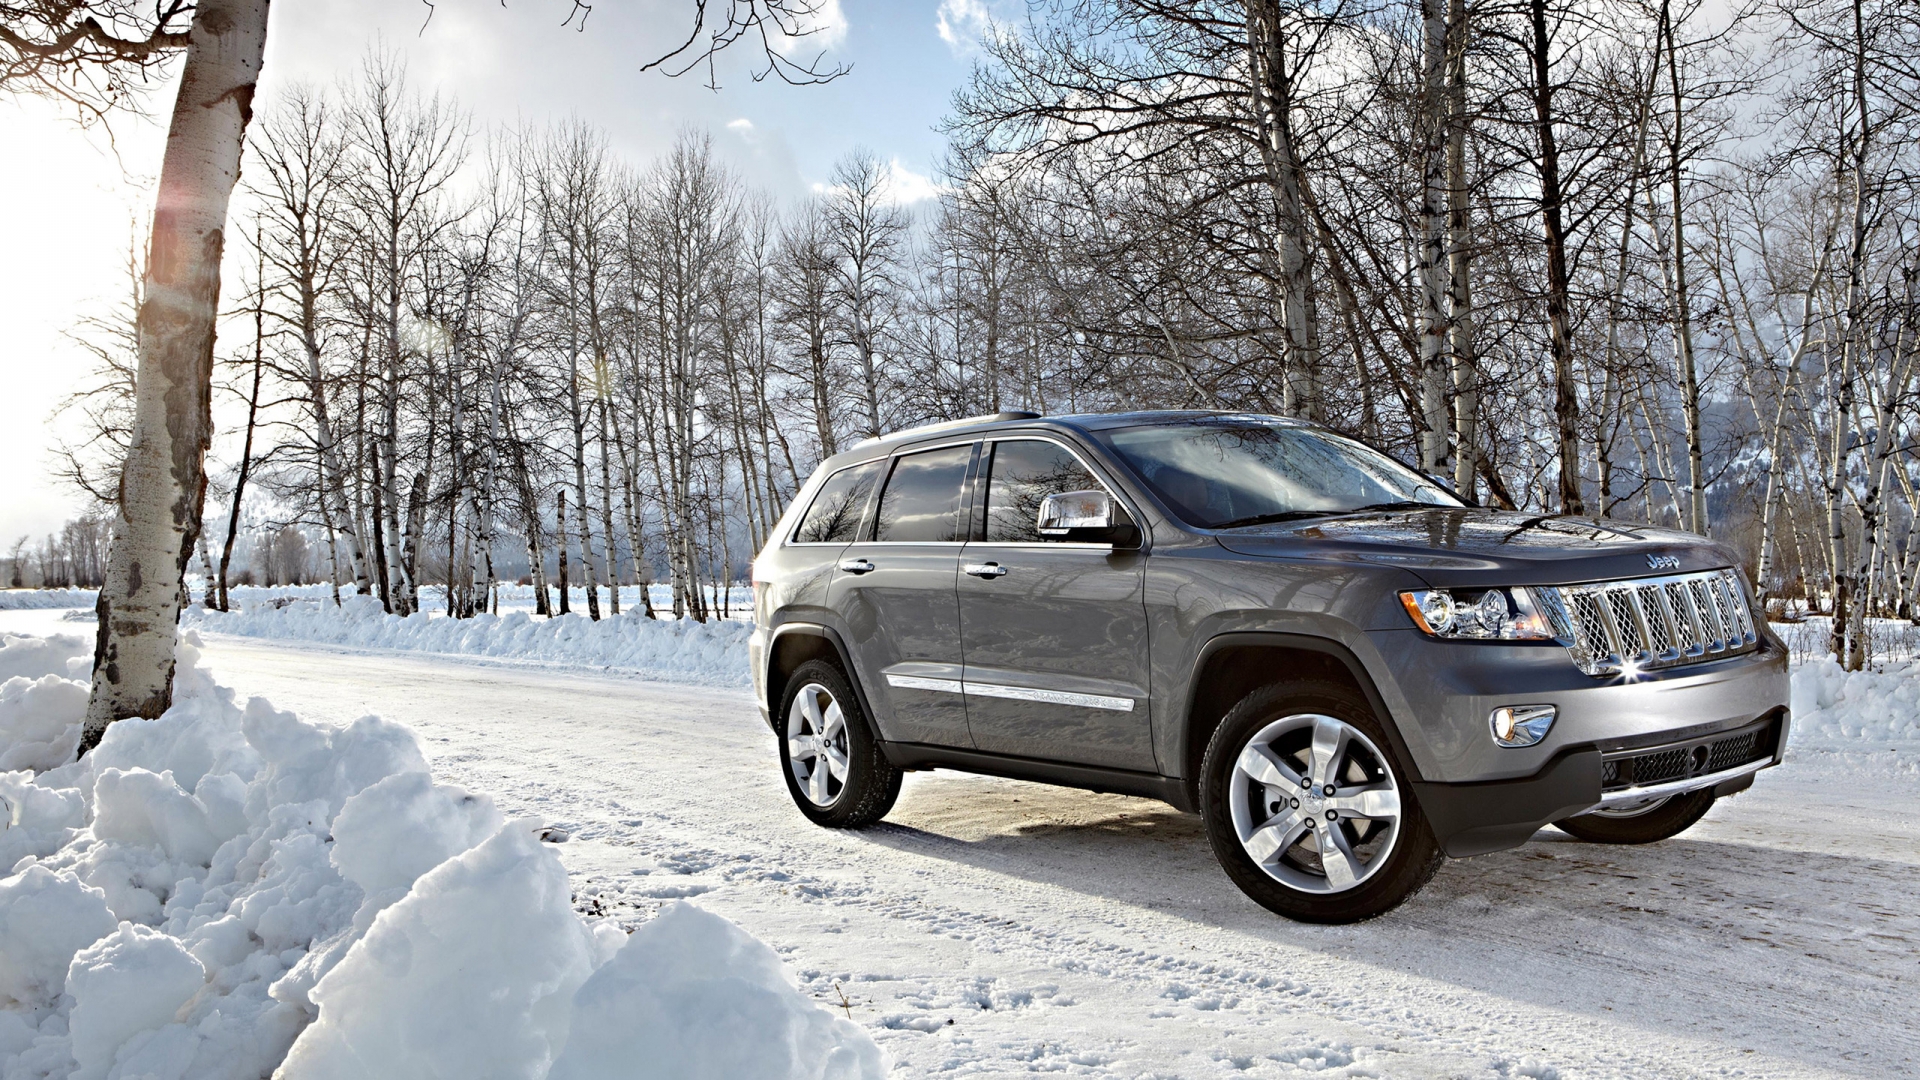 2012 Jeep Grand Cherokee for 1920 x 1080 HDTV 1080p resolution